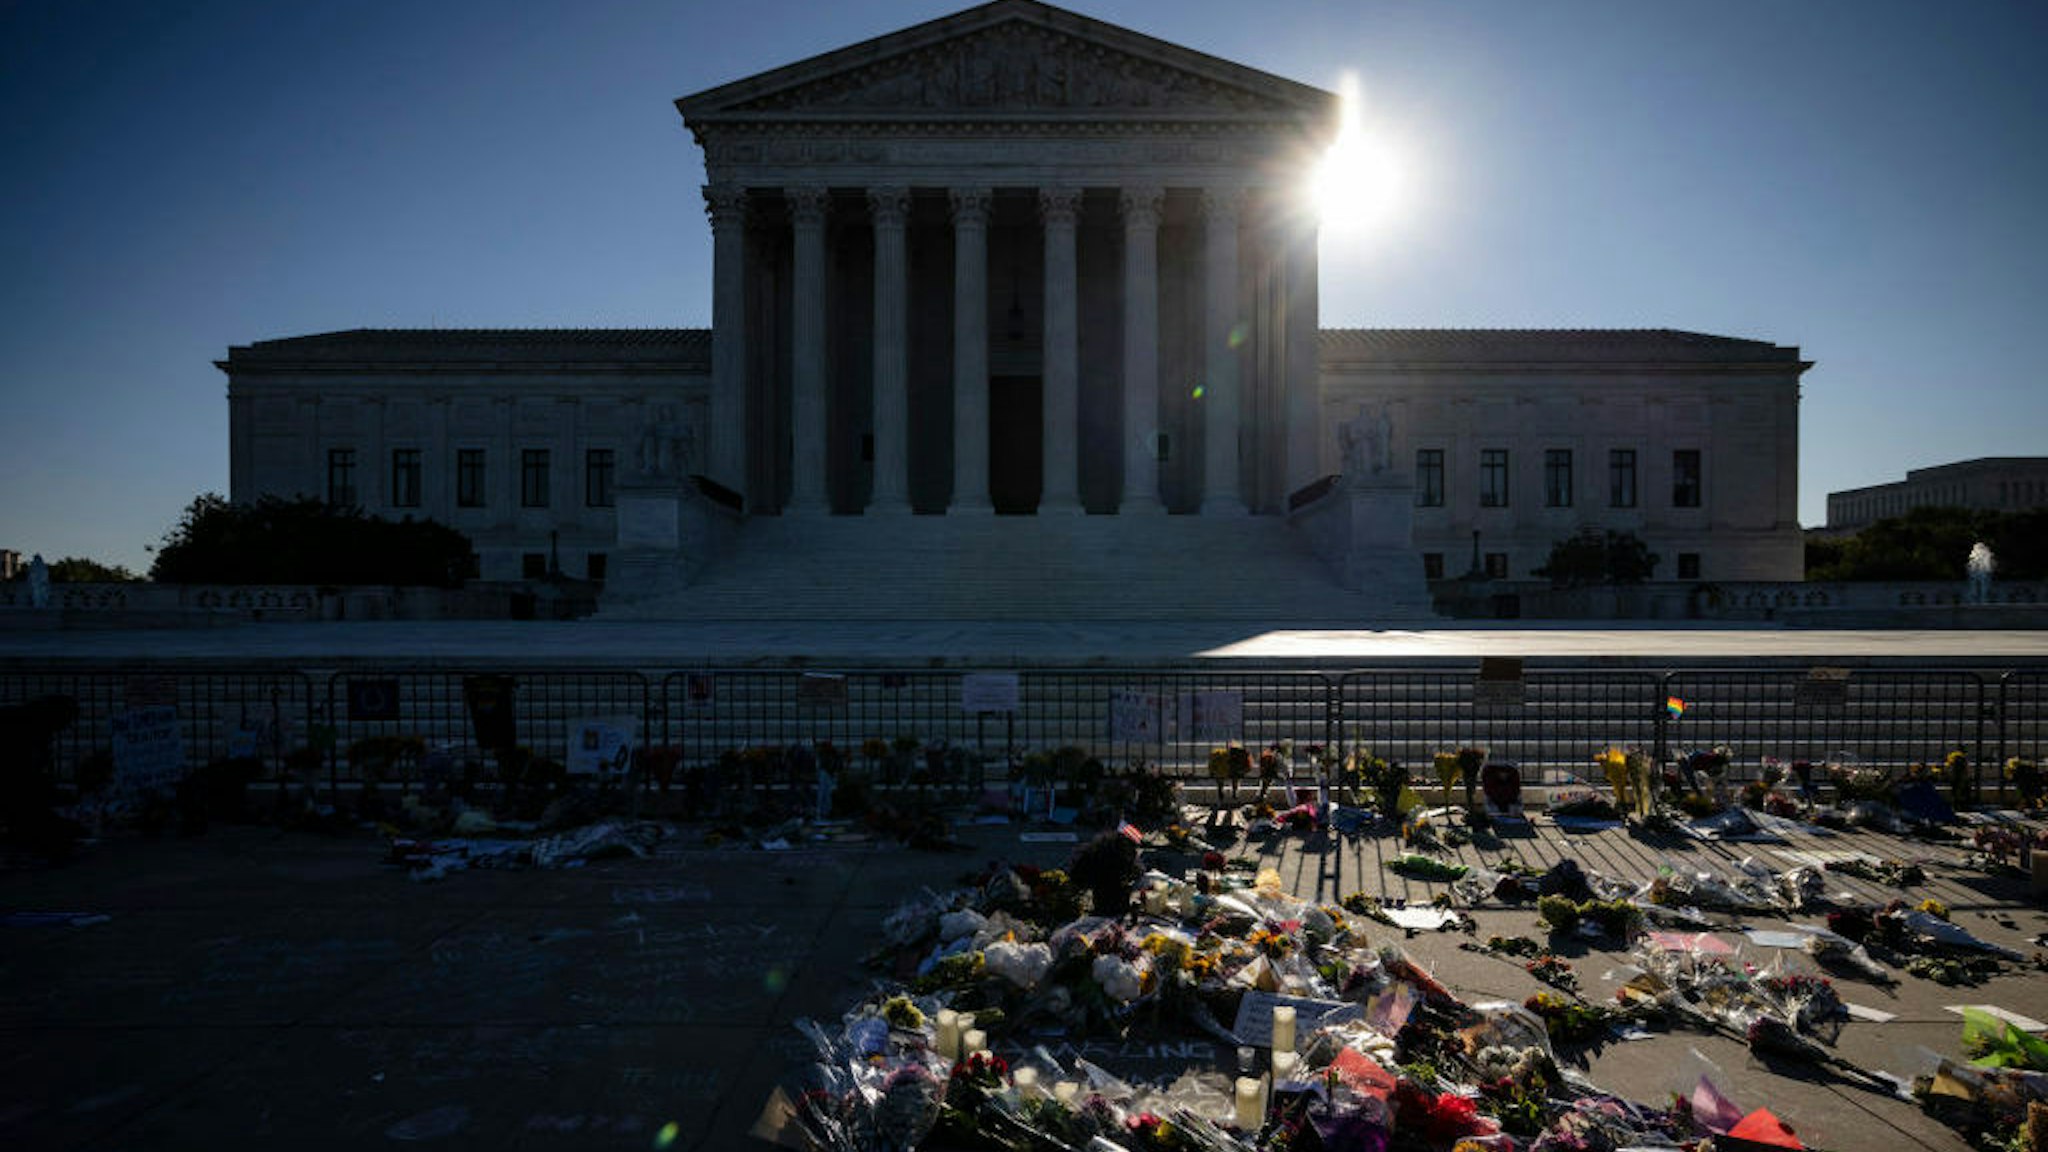 WASHINGTON, DC - SEPTEMBER 20: People place flowers at a makeshift memorial to honor Supreme Court Justice Ruth Bader Ginsburg in front of the US Supreme Court on September 20, 2020 in Washington, DC. Justice Ginsburg has died at age 87 after a battle with pancreatic cancer. (Photo by Samuel Corum/Getty Images)